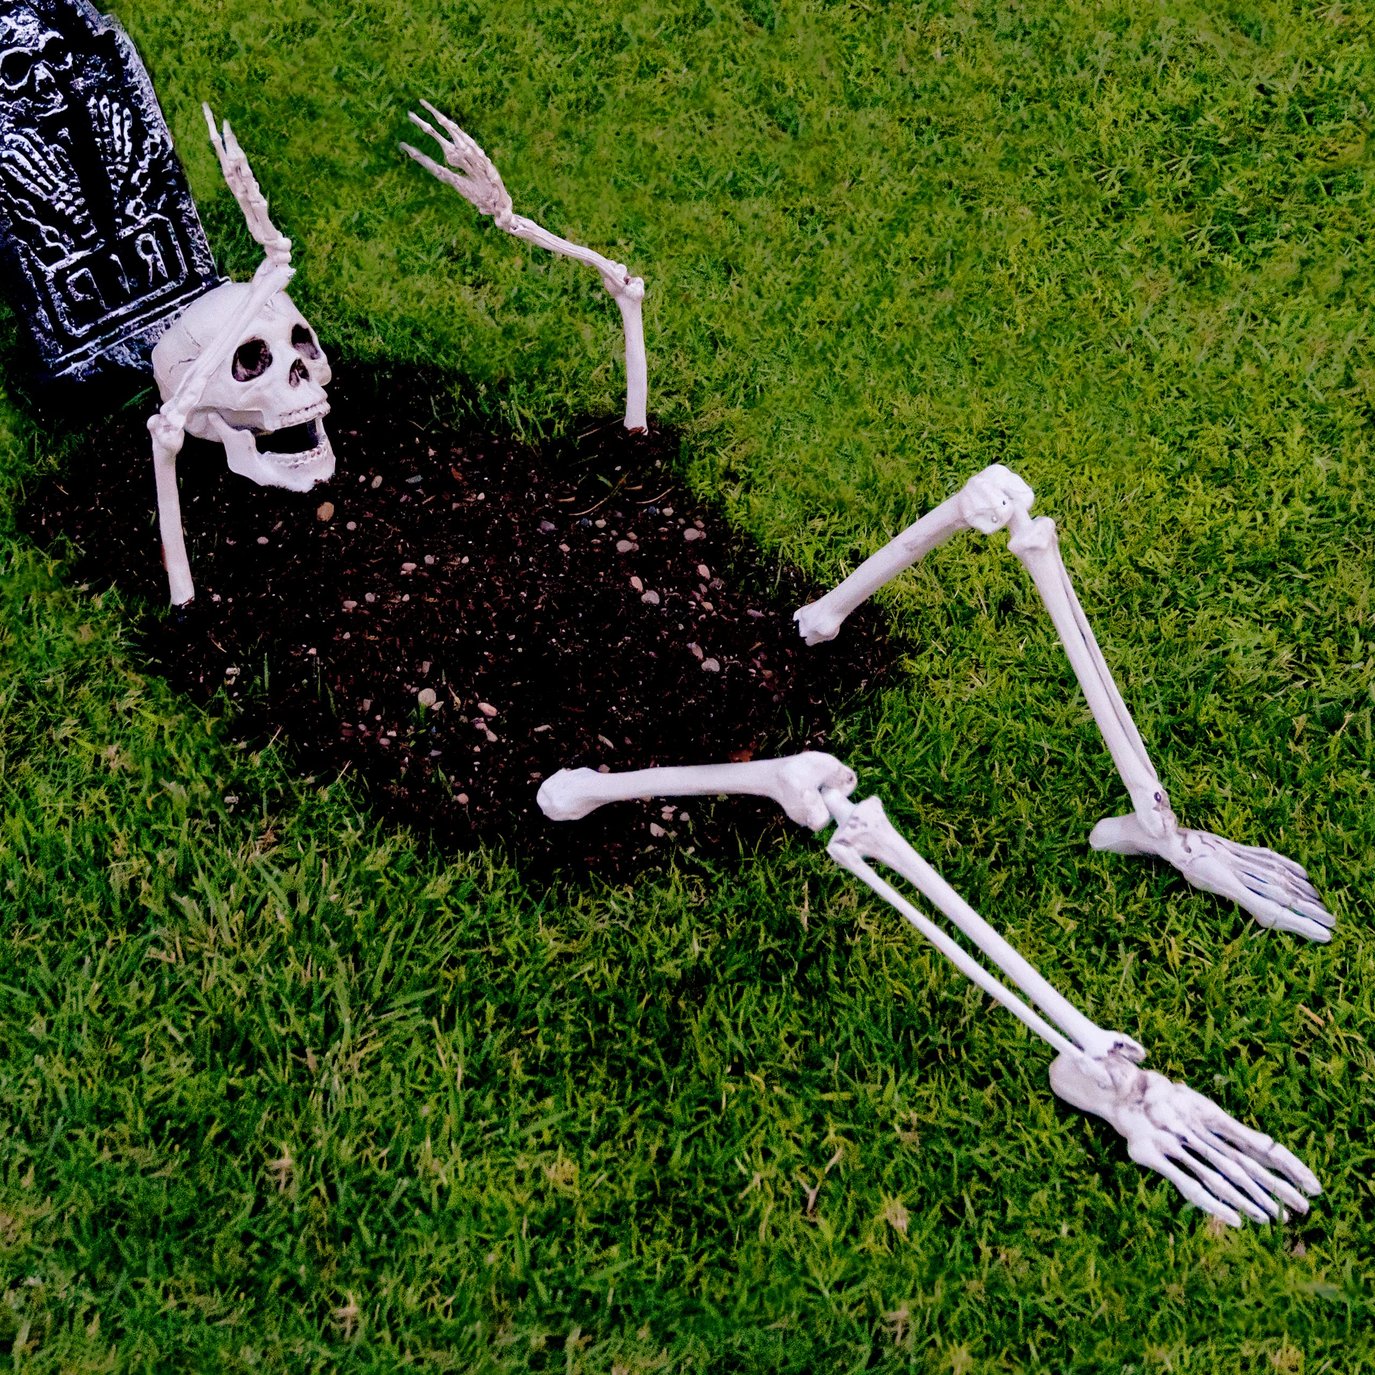 PREXTEX Skeleton Stakes for Outdoor Yard Halloween Decorations - Life-Sized Groundbreaker Skeleton in Front Lawn Garden